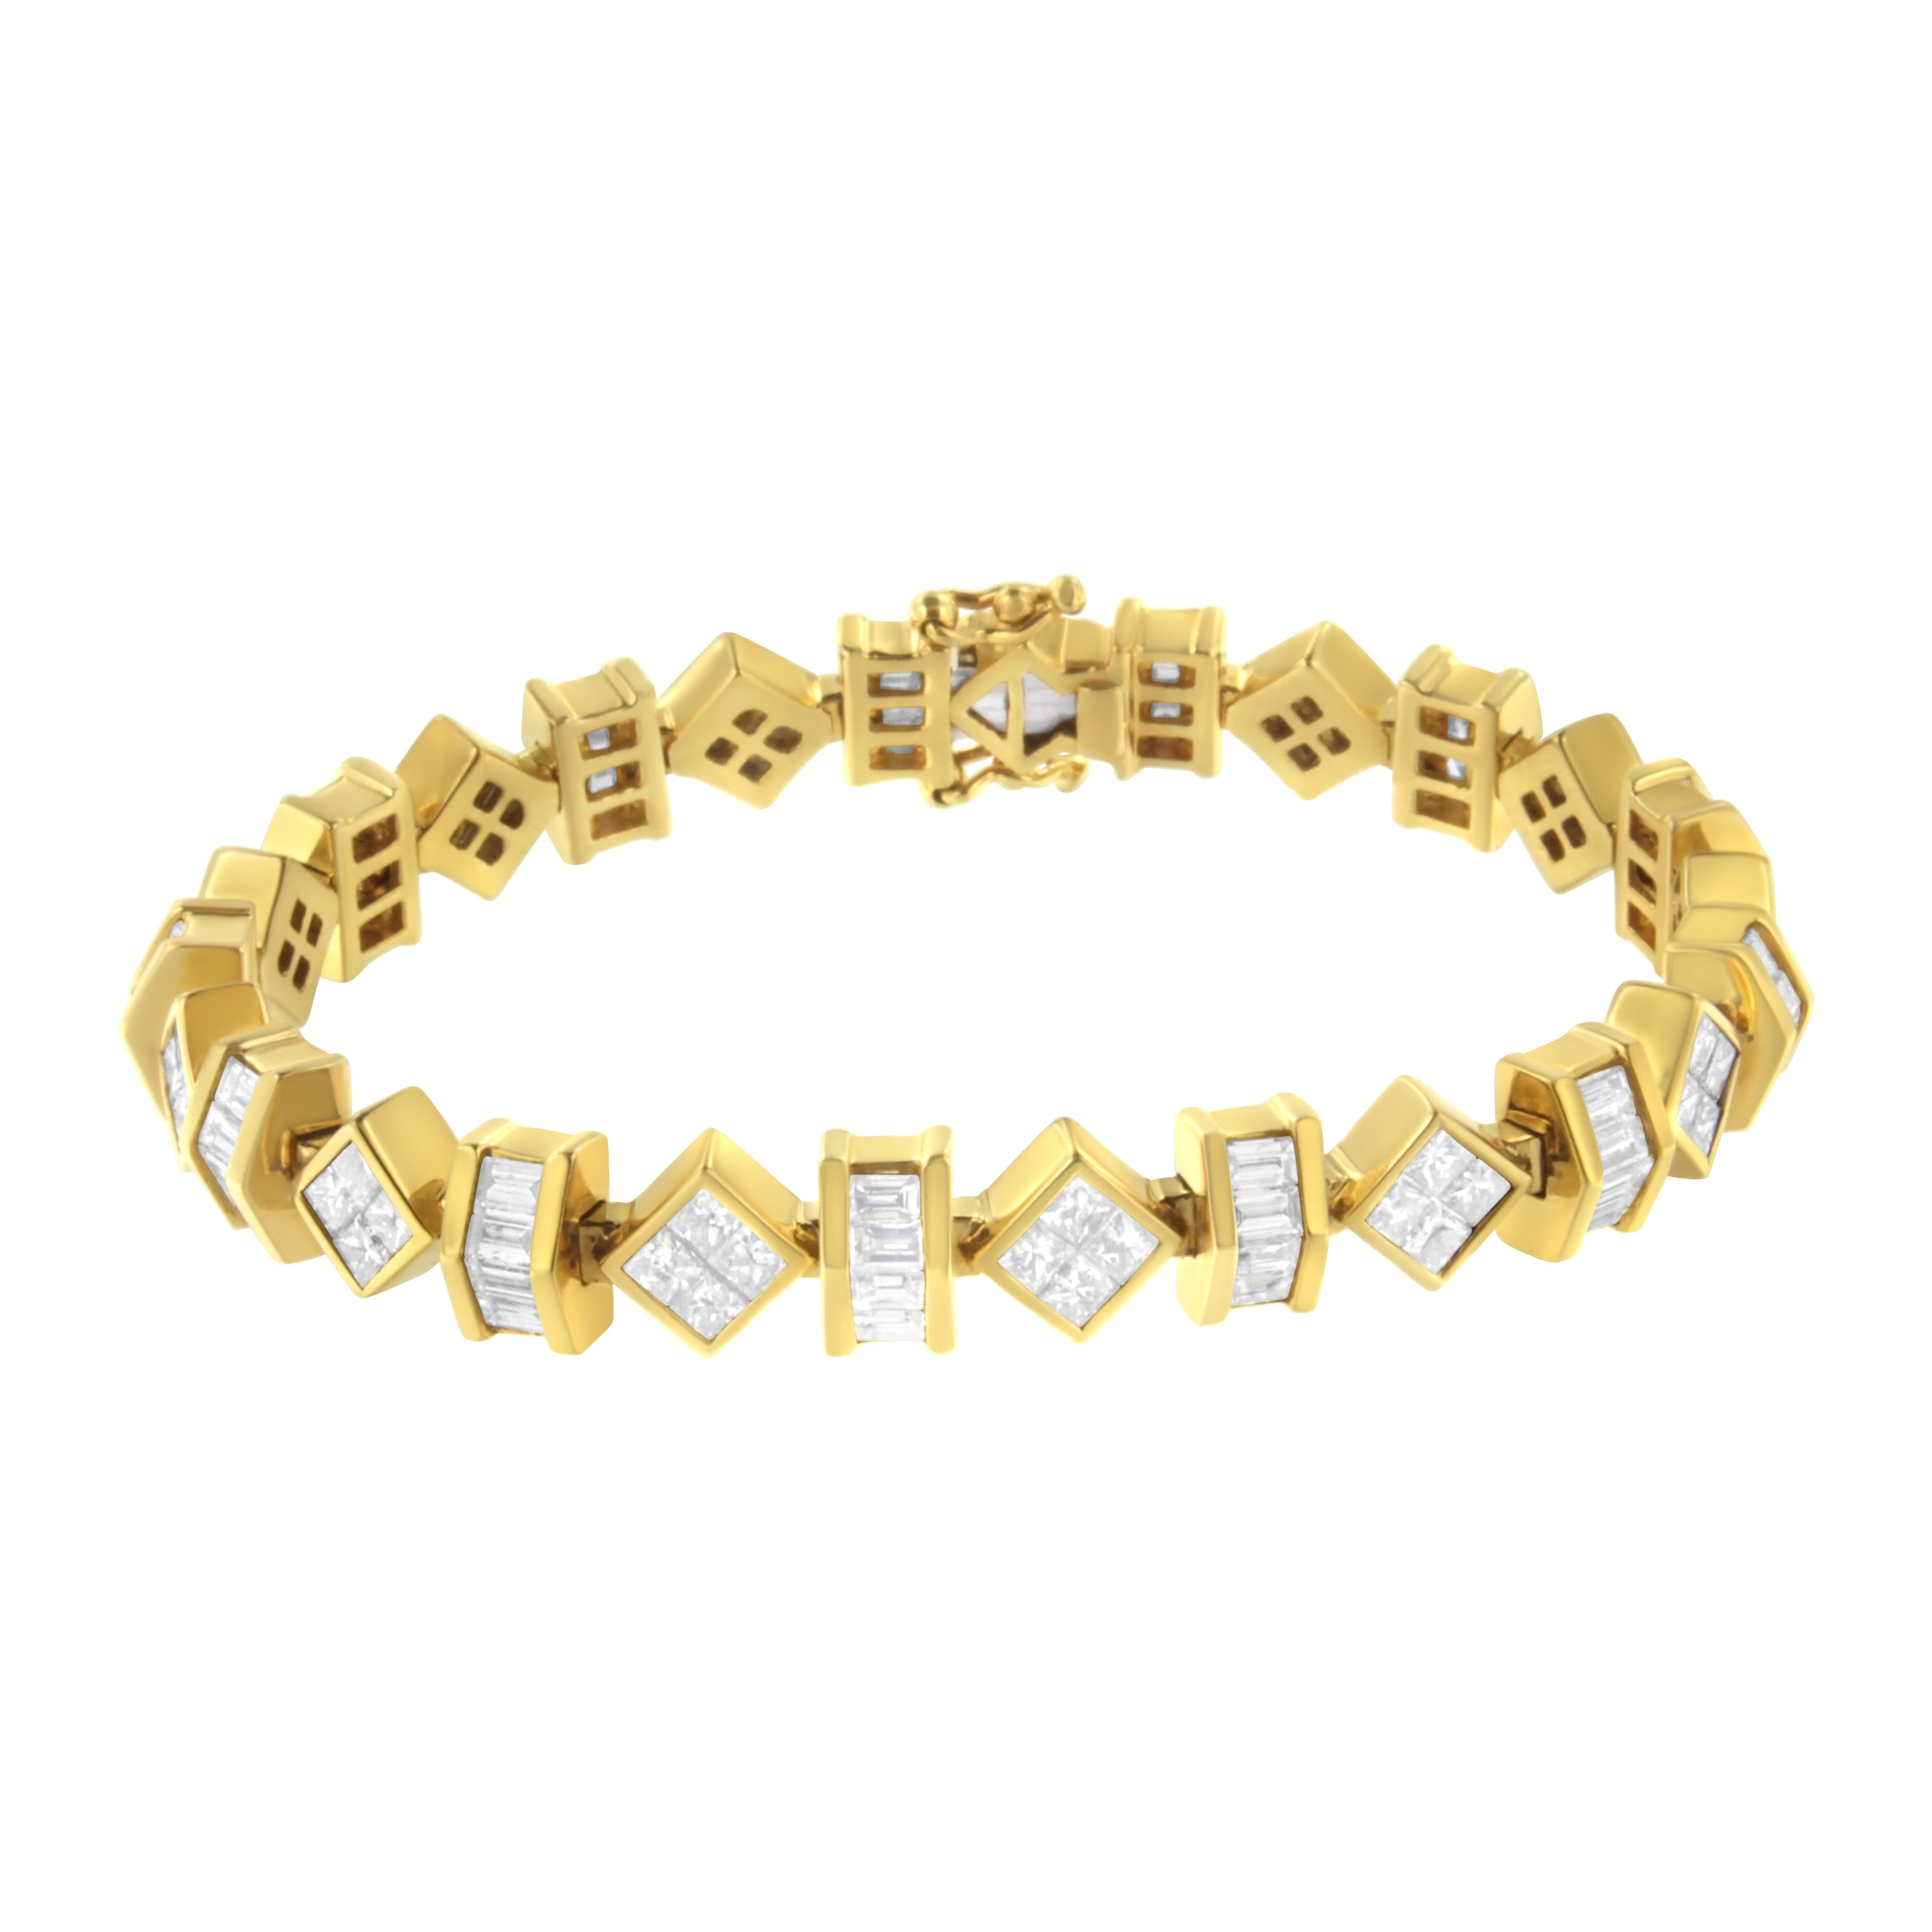 Add style and glamor to any occasion with this gleaming jewelry. Stunning and lightweight, this diamond tennis bracelet is created with rich 14 karats yellow gold. Polished high to shine, this neo-modernist banded bracelet has an alternating pattern